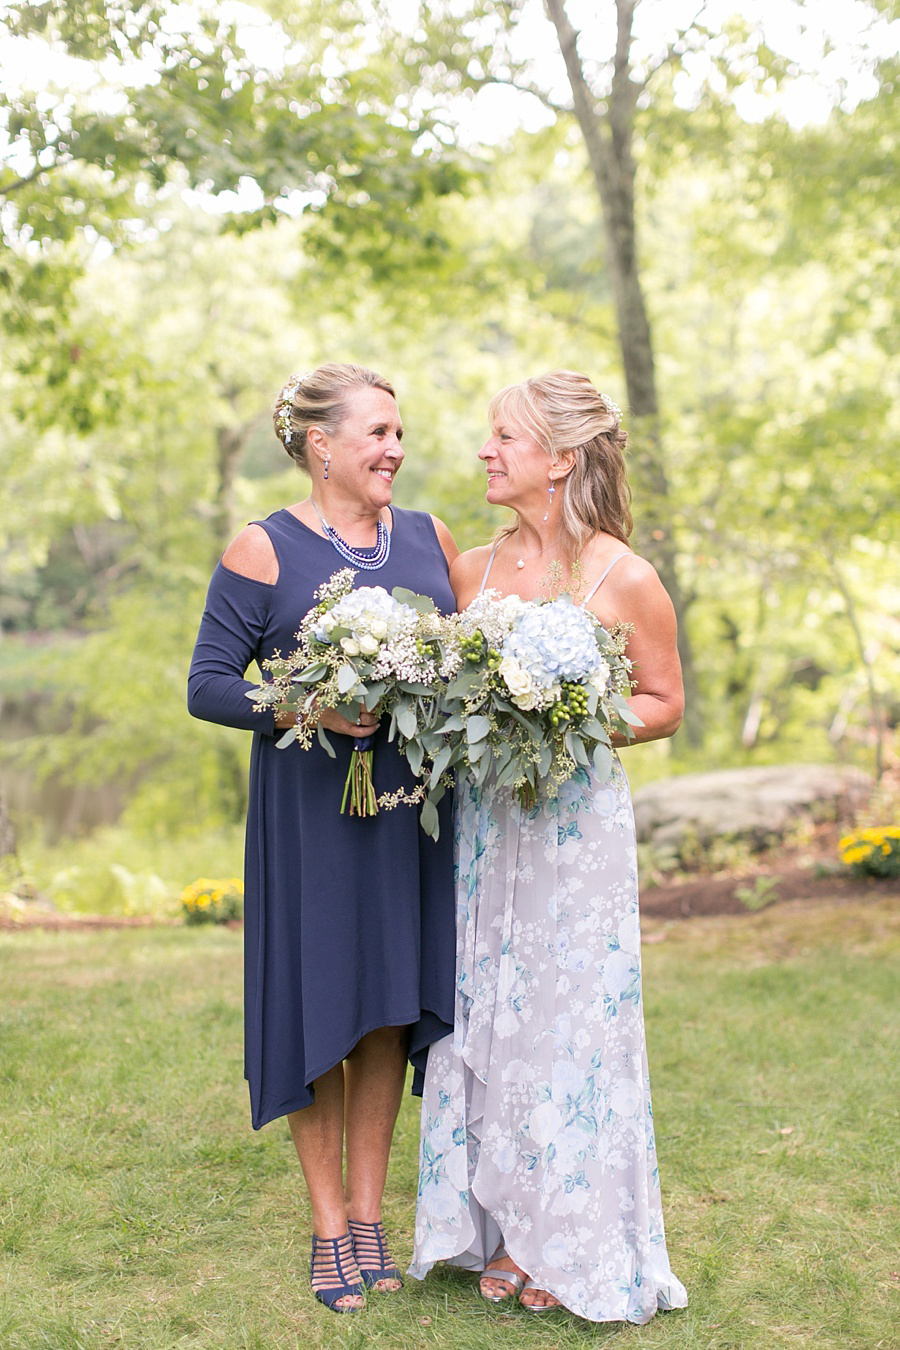 Private Estate Wedding Photographer- Amy Rizzuto Photography-27